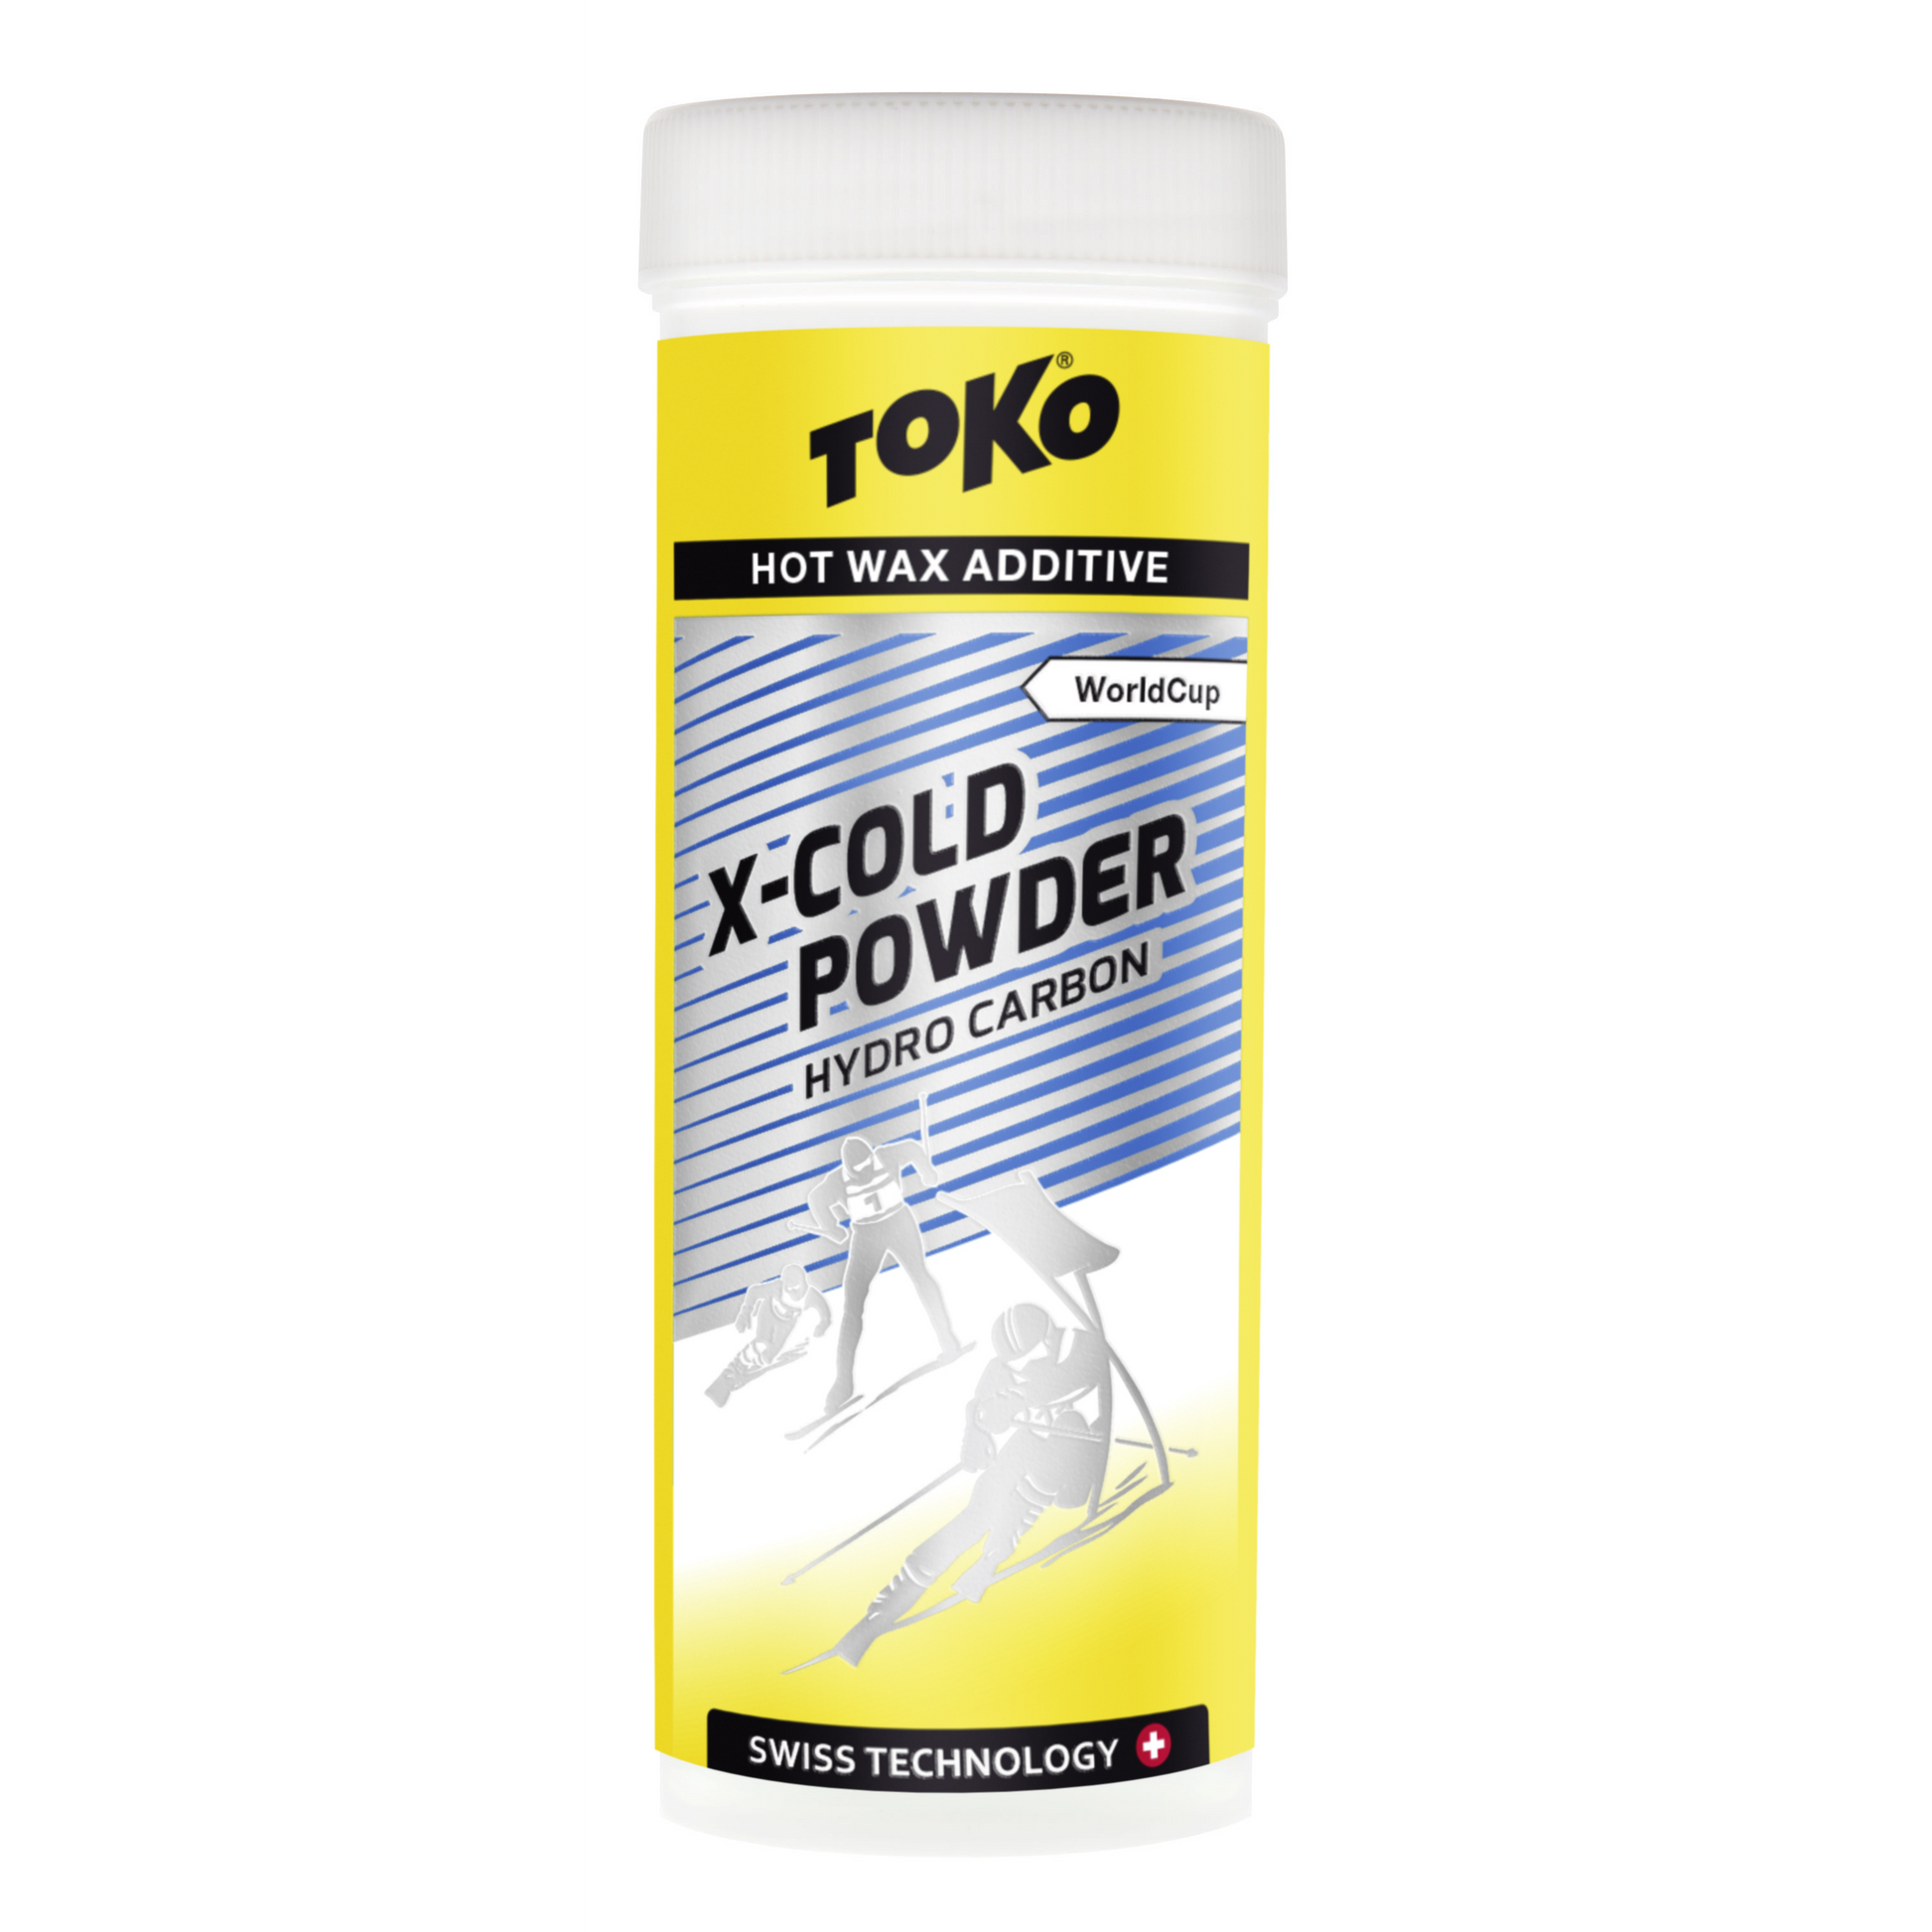 A product picture of the Toko X-Cold Powder